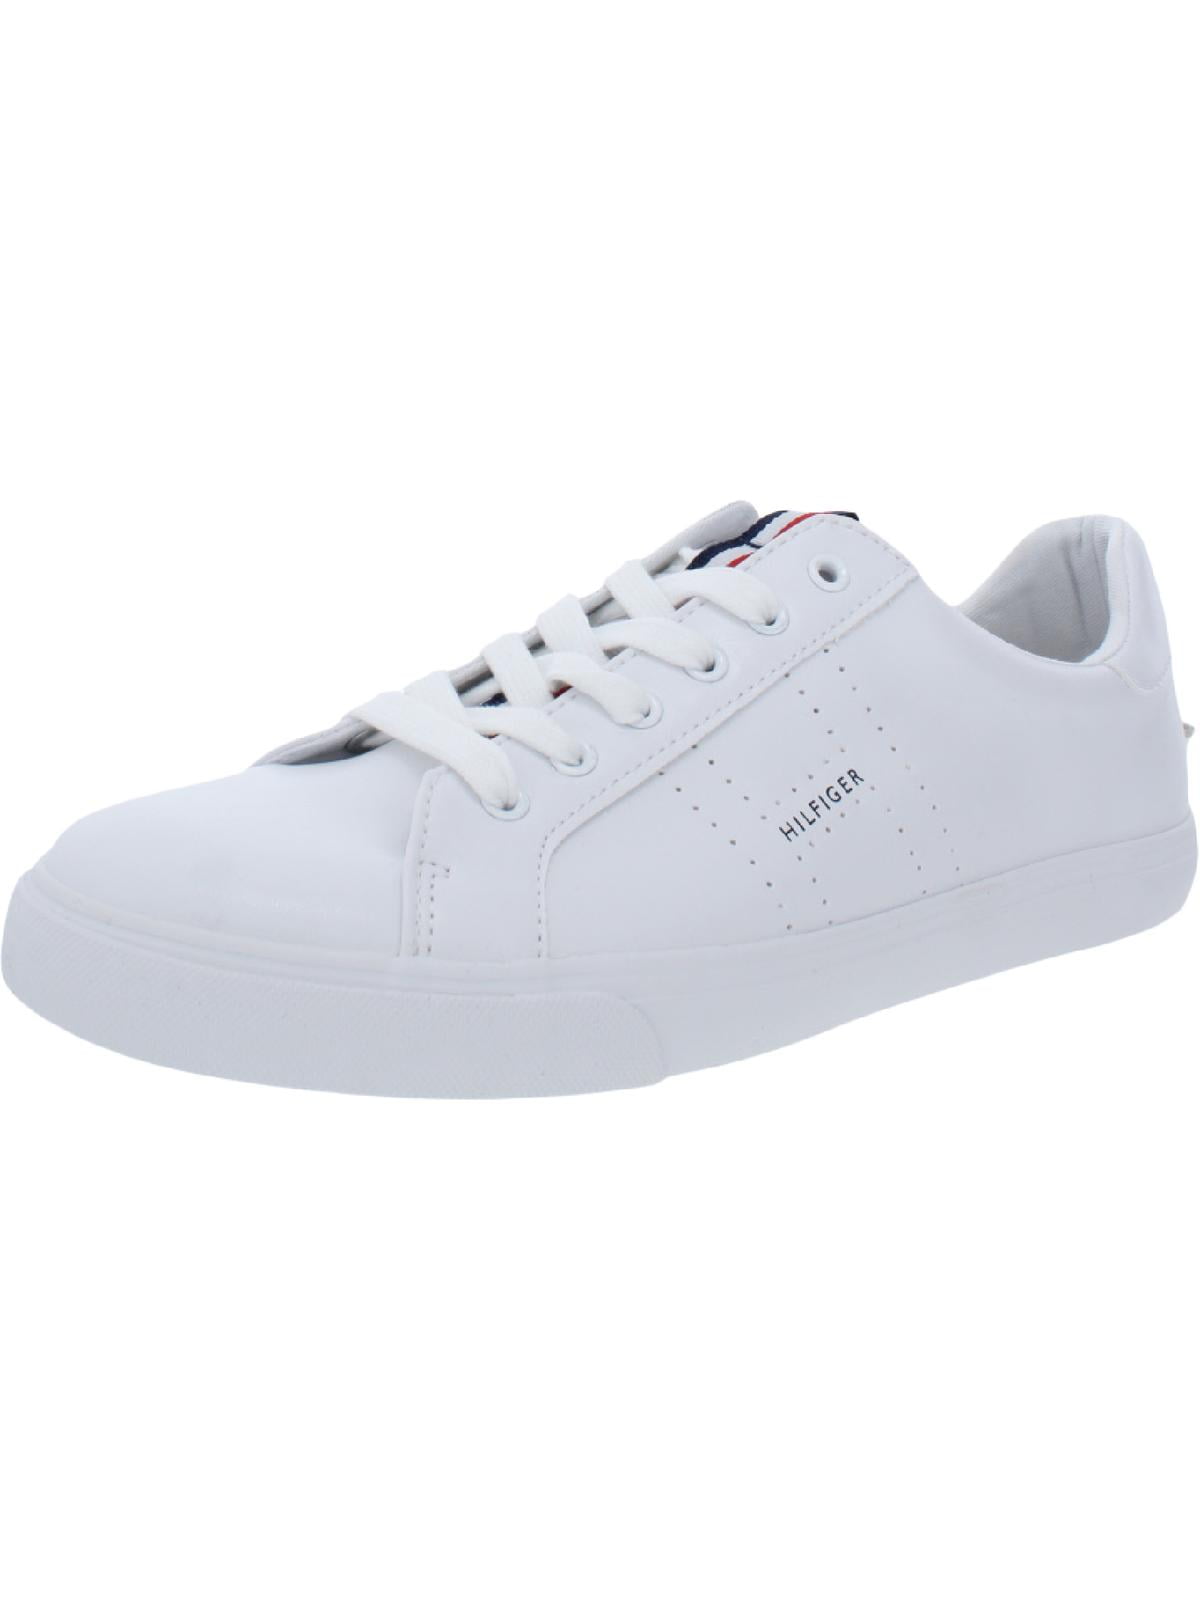 Tommy Hilfiger Lamiss White LL Icon Stripe Low Cut Lace Up Fashion Sneakers  (WHITE LL, 7.5)